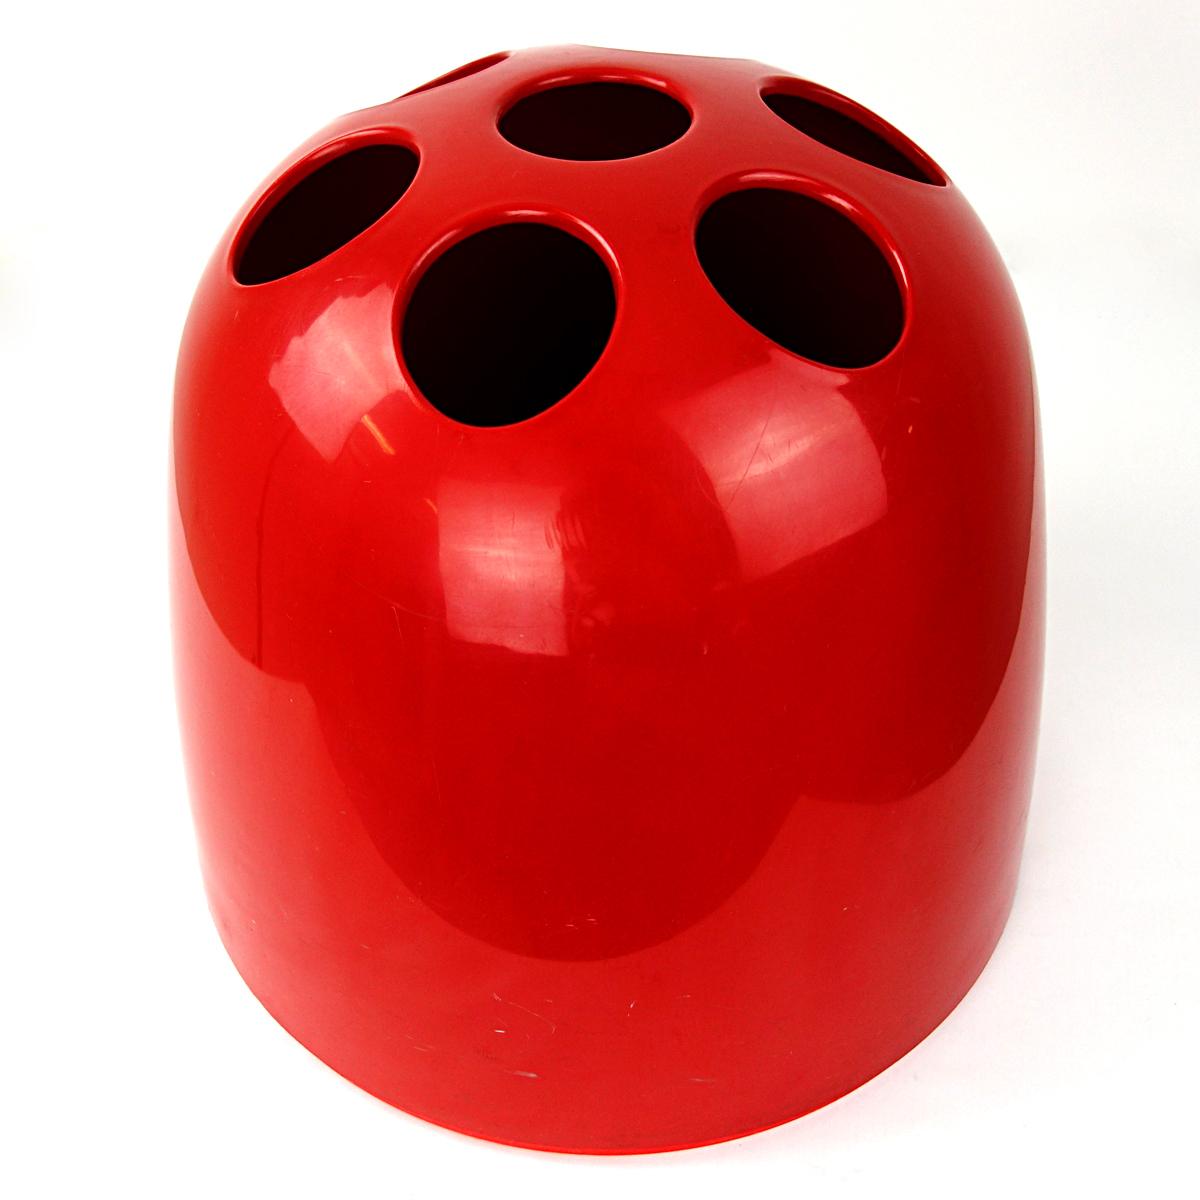 Umbrella stand Dedalo was designed in 1966 by Emma Gismondi Schweinberger for Artemide.
It is made of red ABS plastic.
The series consisted of three different sizes: the small Dedalino (a pencil holders), the medium sized Dedalotto (a vase) and